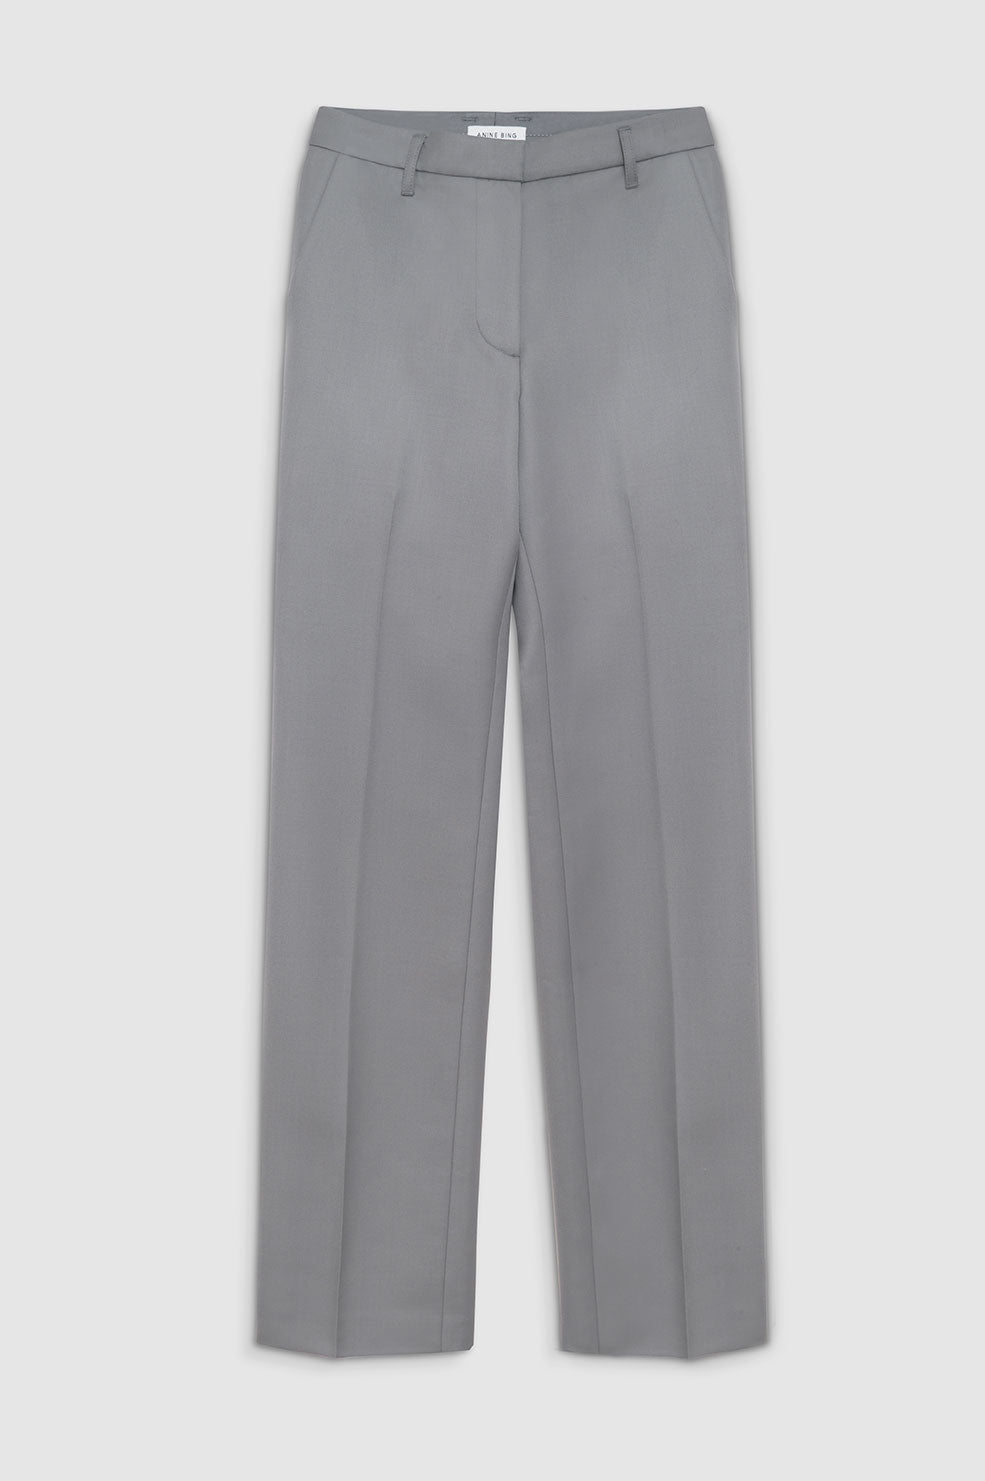 ANINE BING Classic Pant - Grey - Front View